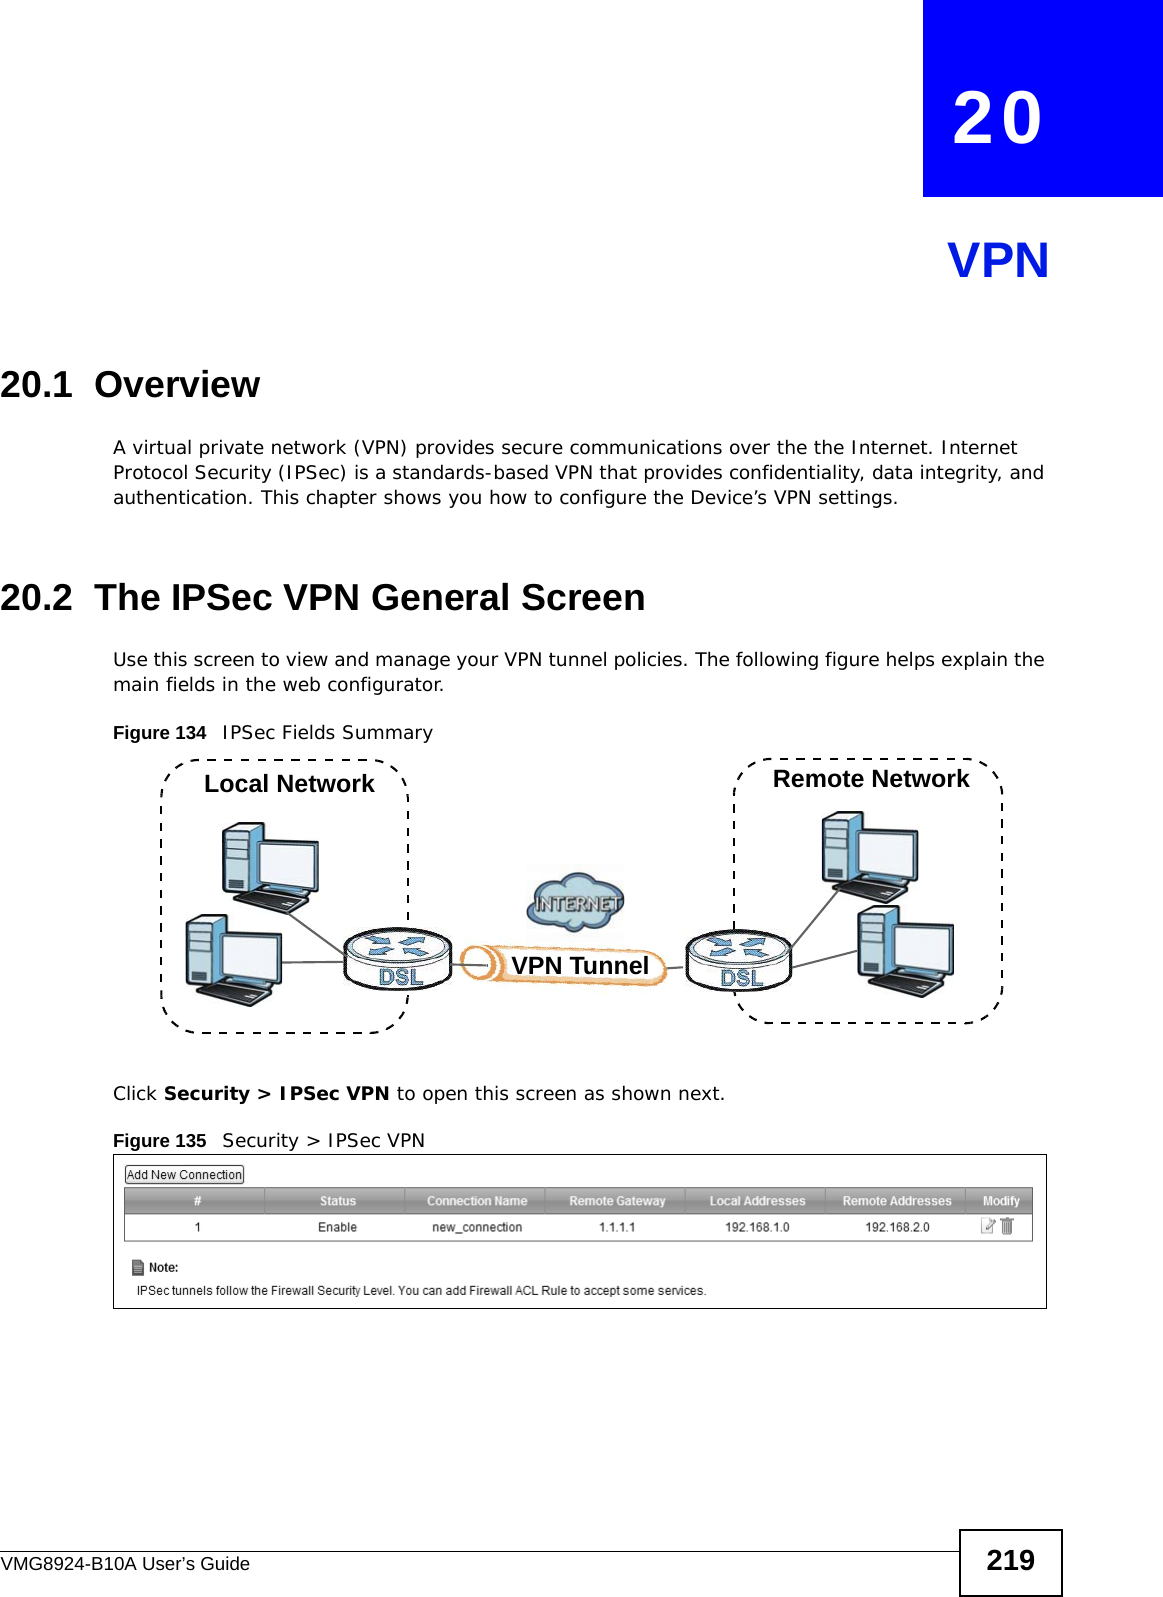 VMG8924-B10A User’s Guide 219CHAPTER   20VPN20.1  OverviewA virtual private network (VPN) provides secure communications over the the Internet. Internet Protocol Security (IPSec) is a standards-based VPN that provides confidentiality, data integrity, and authentication. This chapter shows you how to configure the Device’s VPN settings.20.2  The IPSec VPN General ScreenUse this screen to view and manage your VPN tunnel policies. The following figure helps explain the main fields in the web configurator. Figure 134   IPSec Fields SummaryClick Security &gt; IPSec VPN to open this screen as shown next.Figure 135   Security &gt; IPSec VPNLocal Network Remote NetworkVPN Tunnel